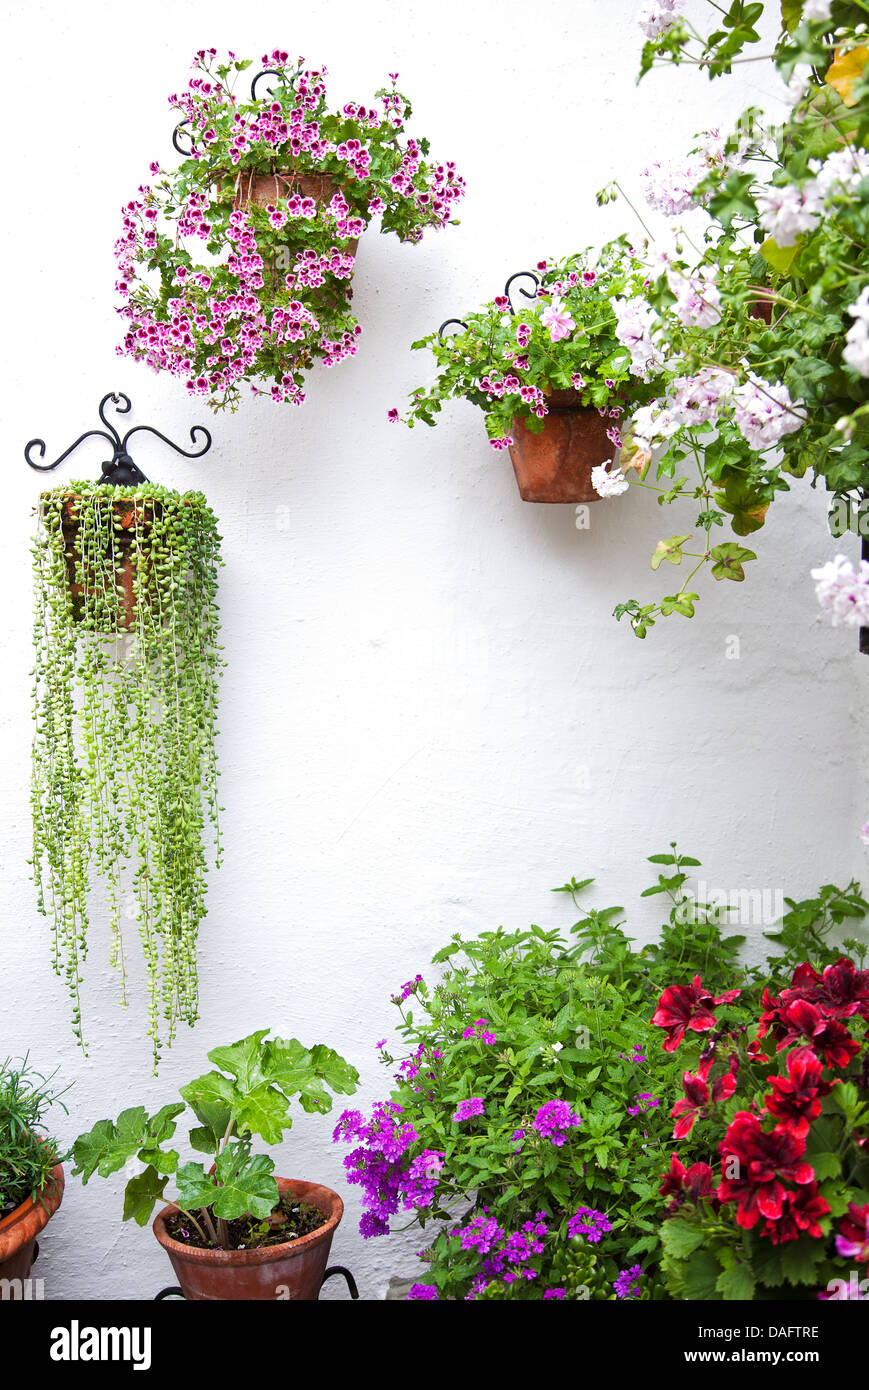 WALL WITH FLOWERS POTS. Stock Photo